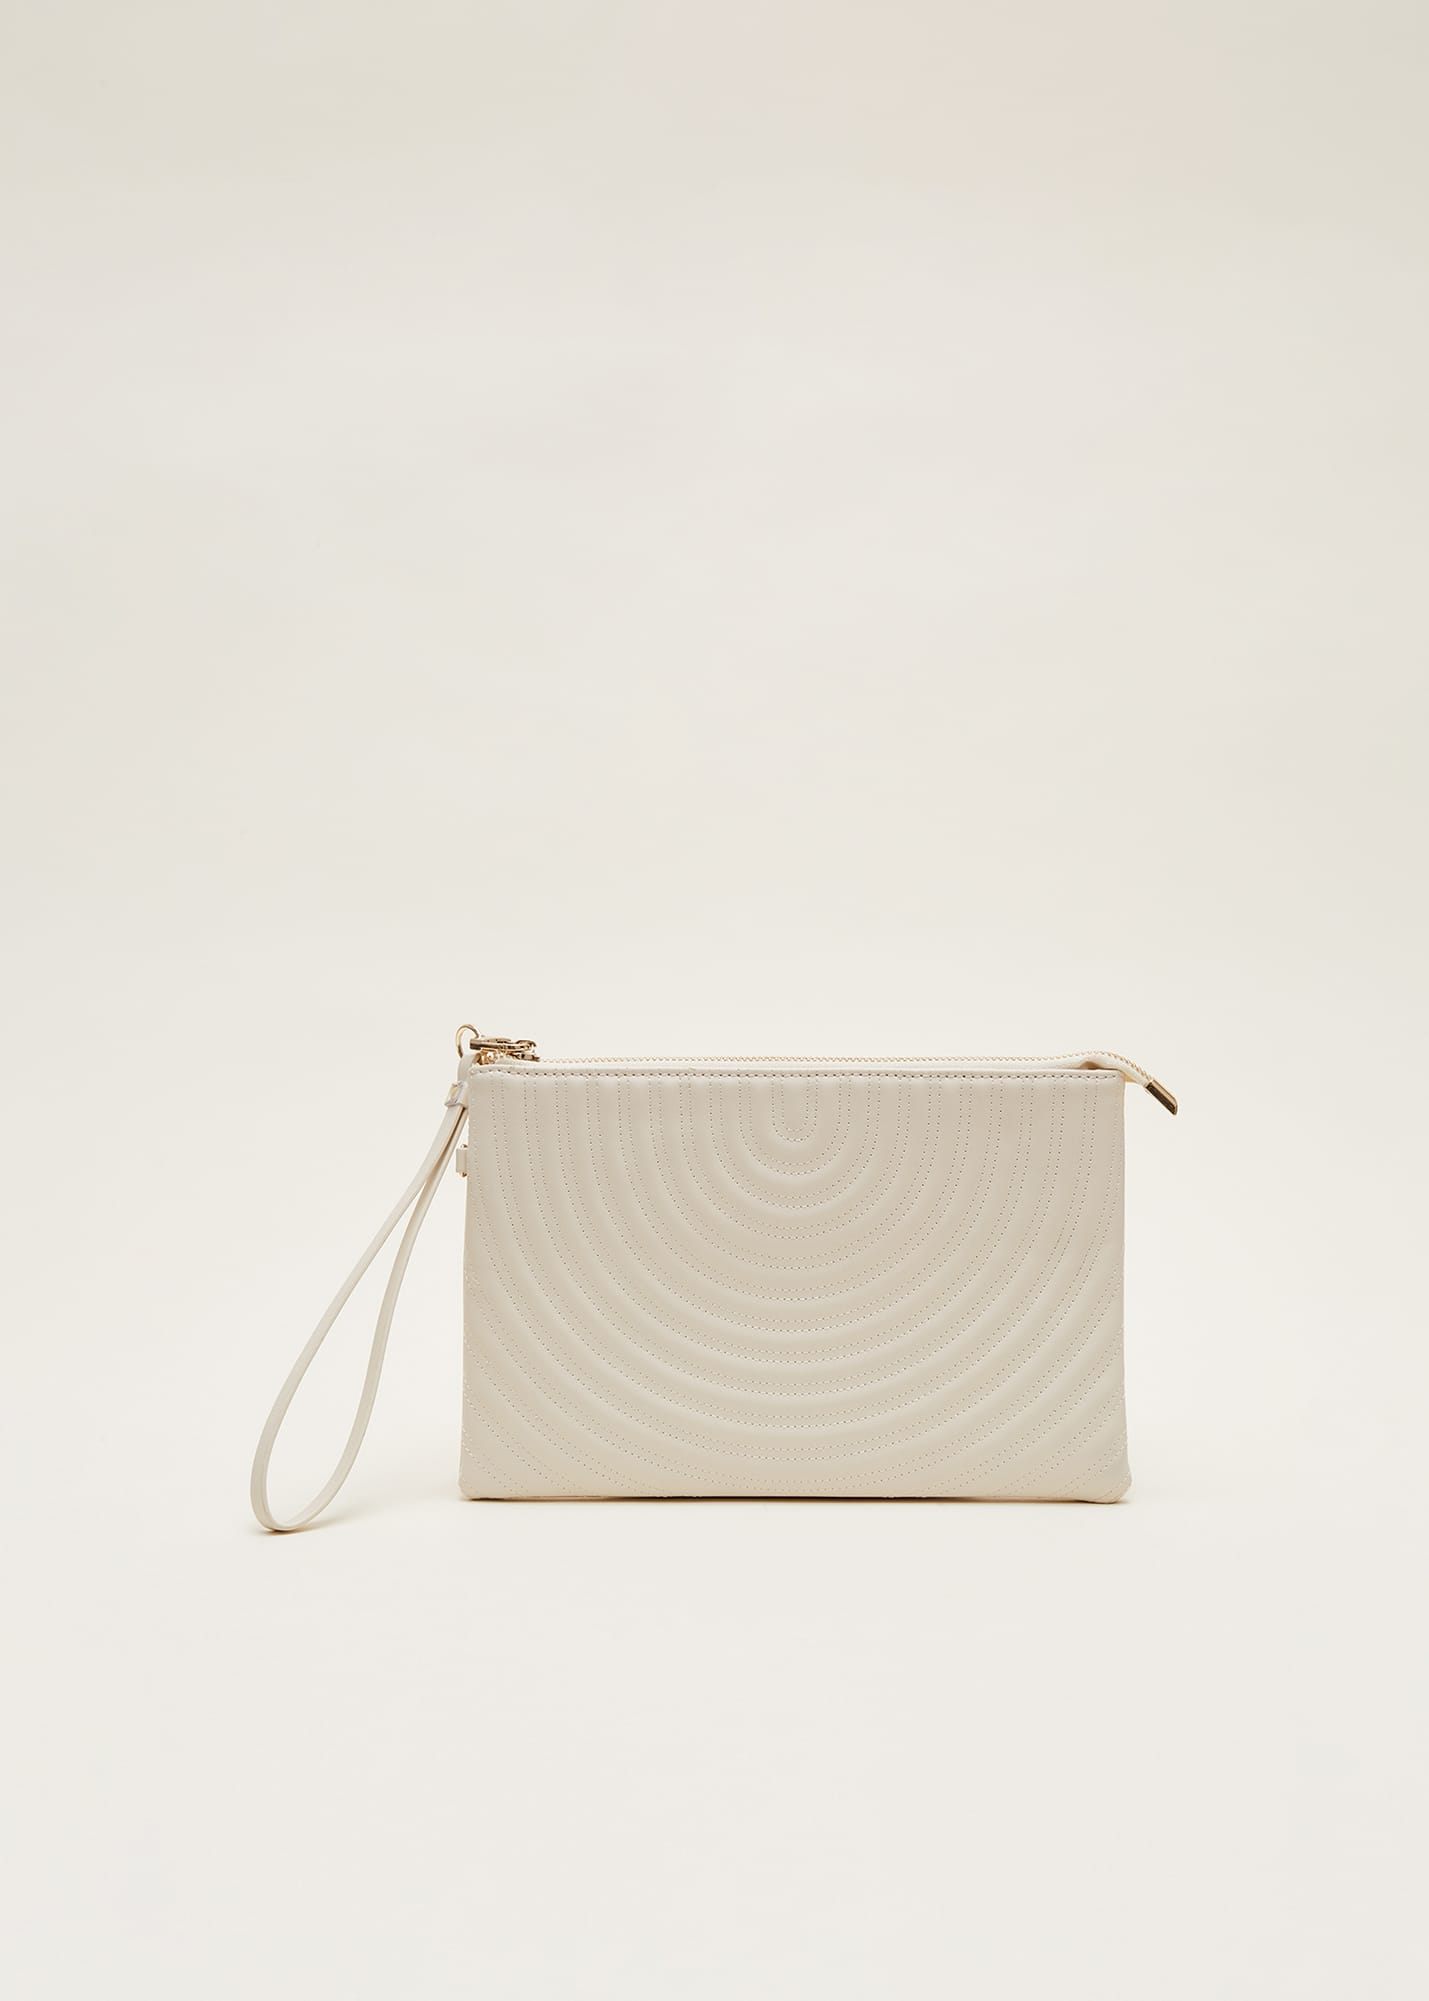 Phase Eight Women's Cream Leather Clutch Bag